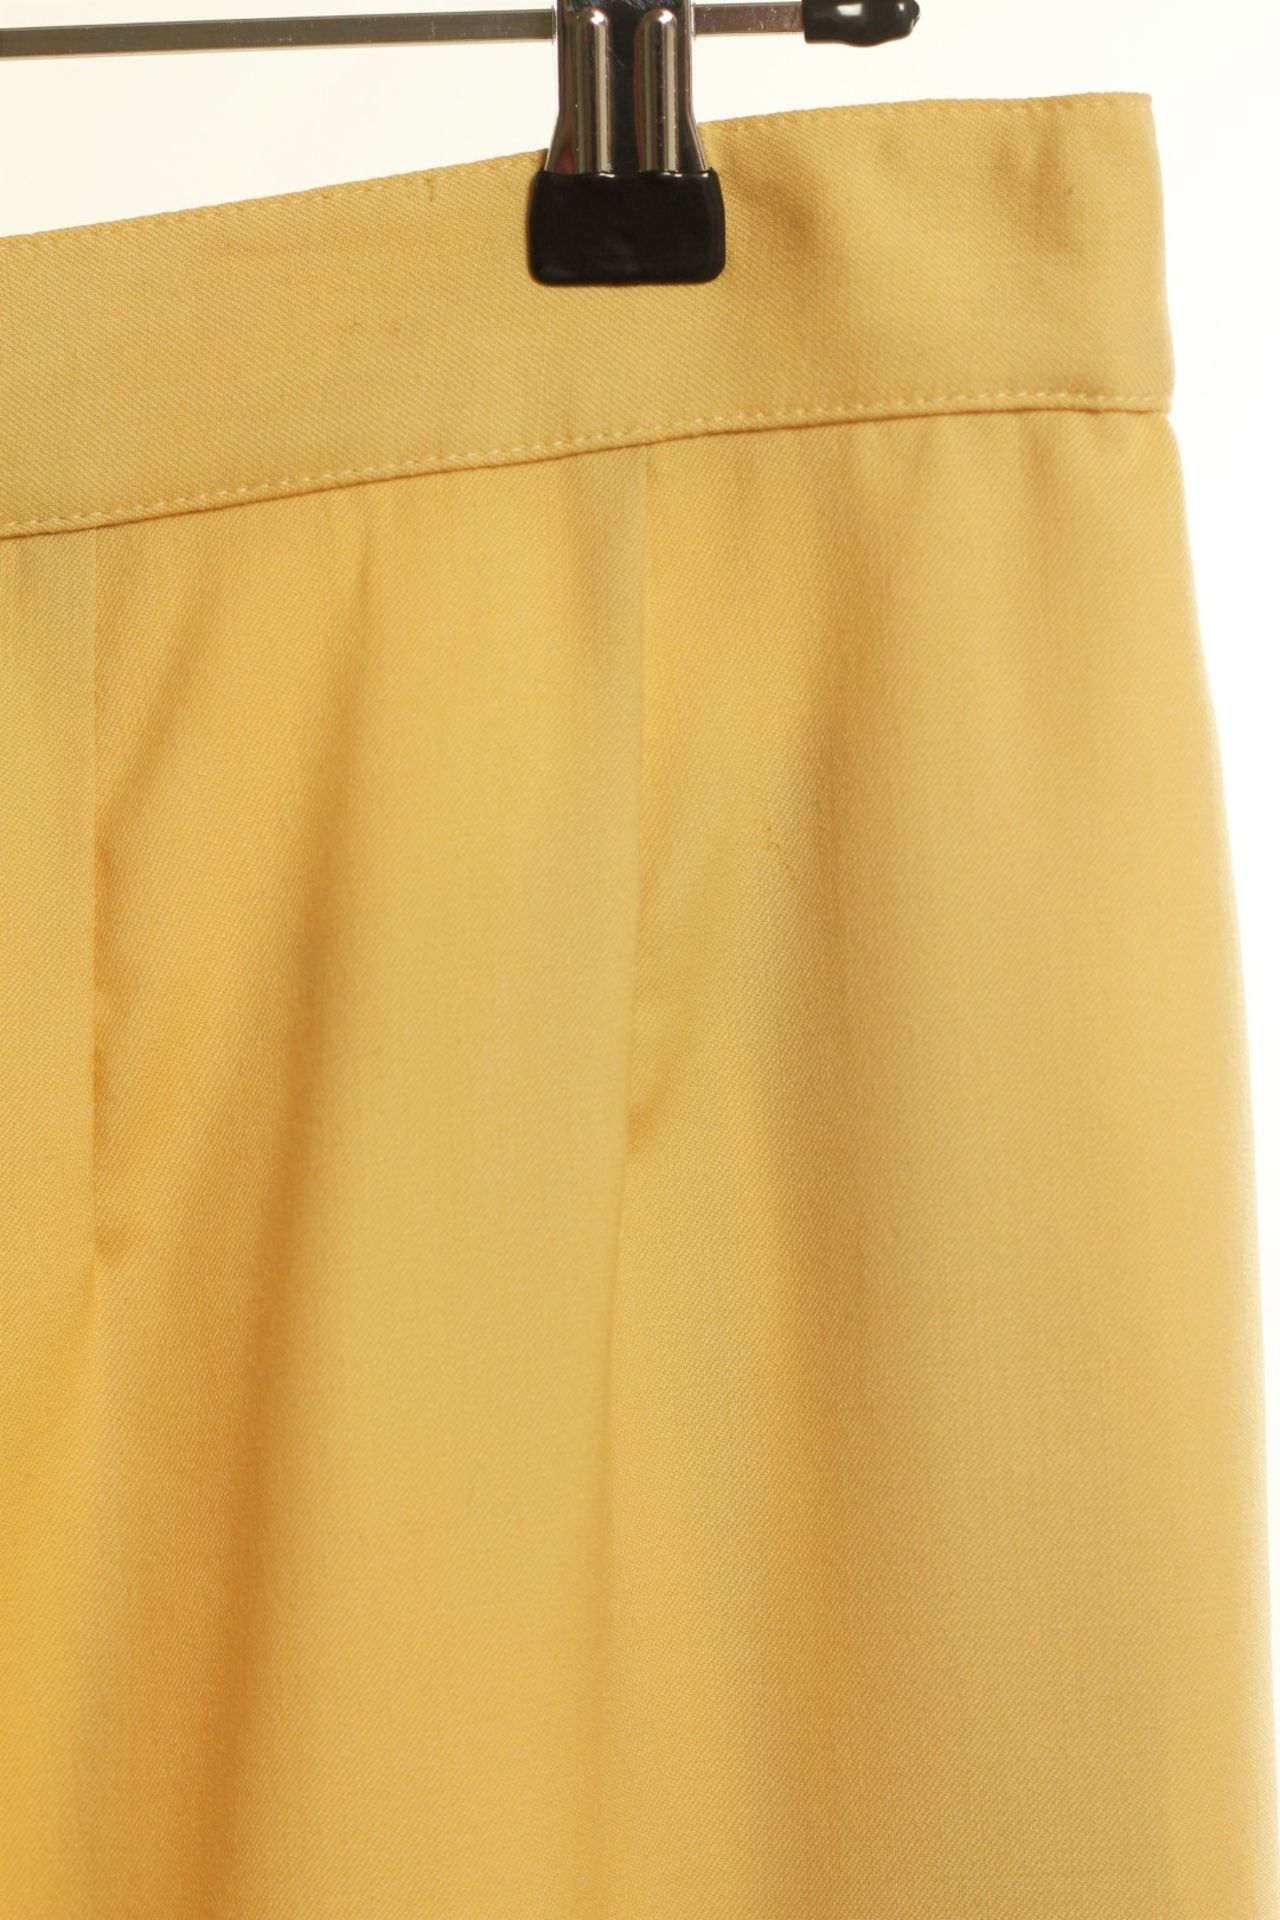 1 x Artico Cream Trousers - Size: 18 - Material: 100% Leather. Lining 50% viscose, 50% Acetate - - Image 5 of 9